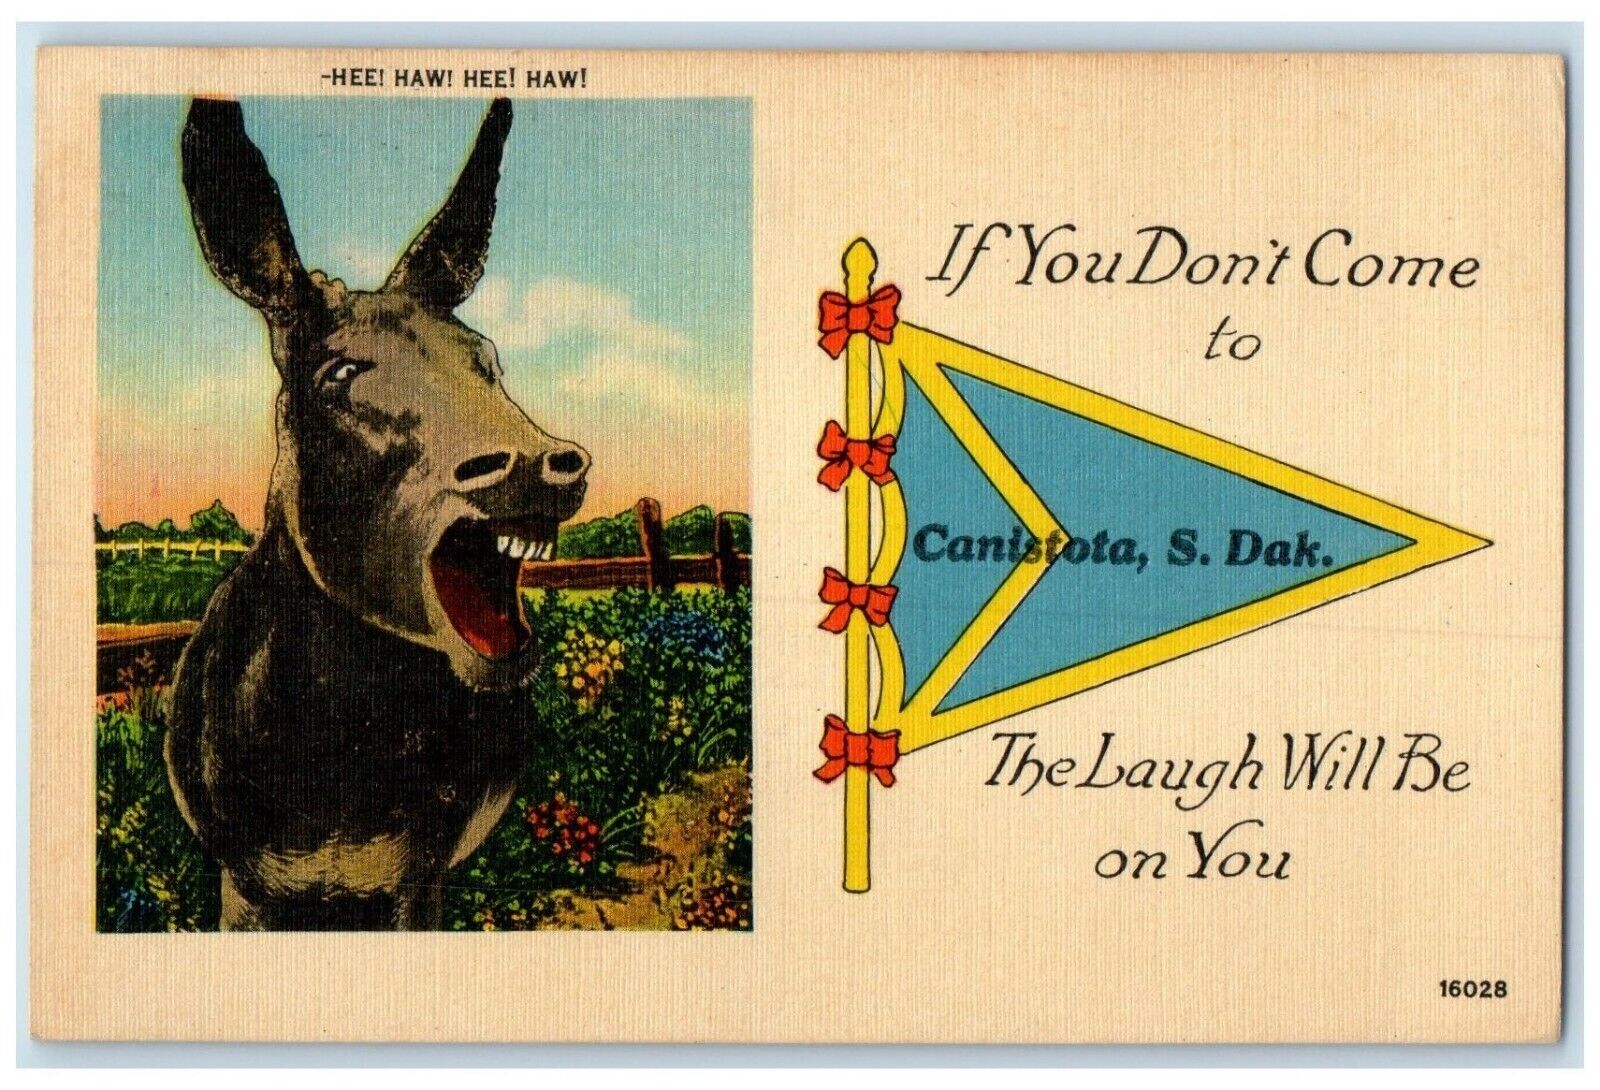 1949 If You Don\'t Come Canistota South Dakota Laugh Will Be You Pennant Postcard